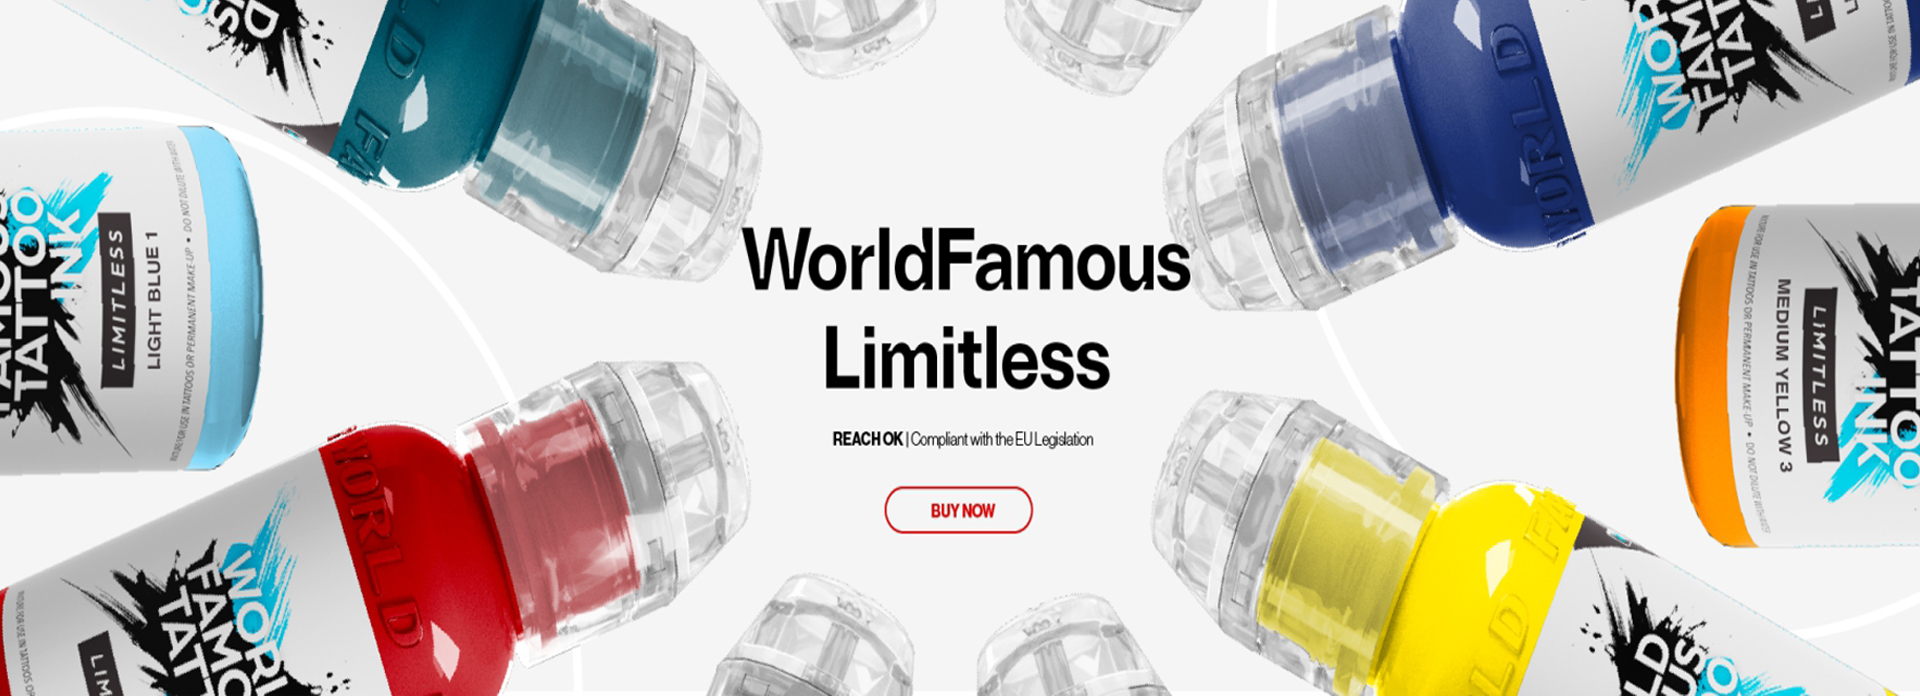 world famous limitless